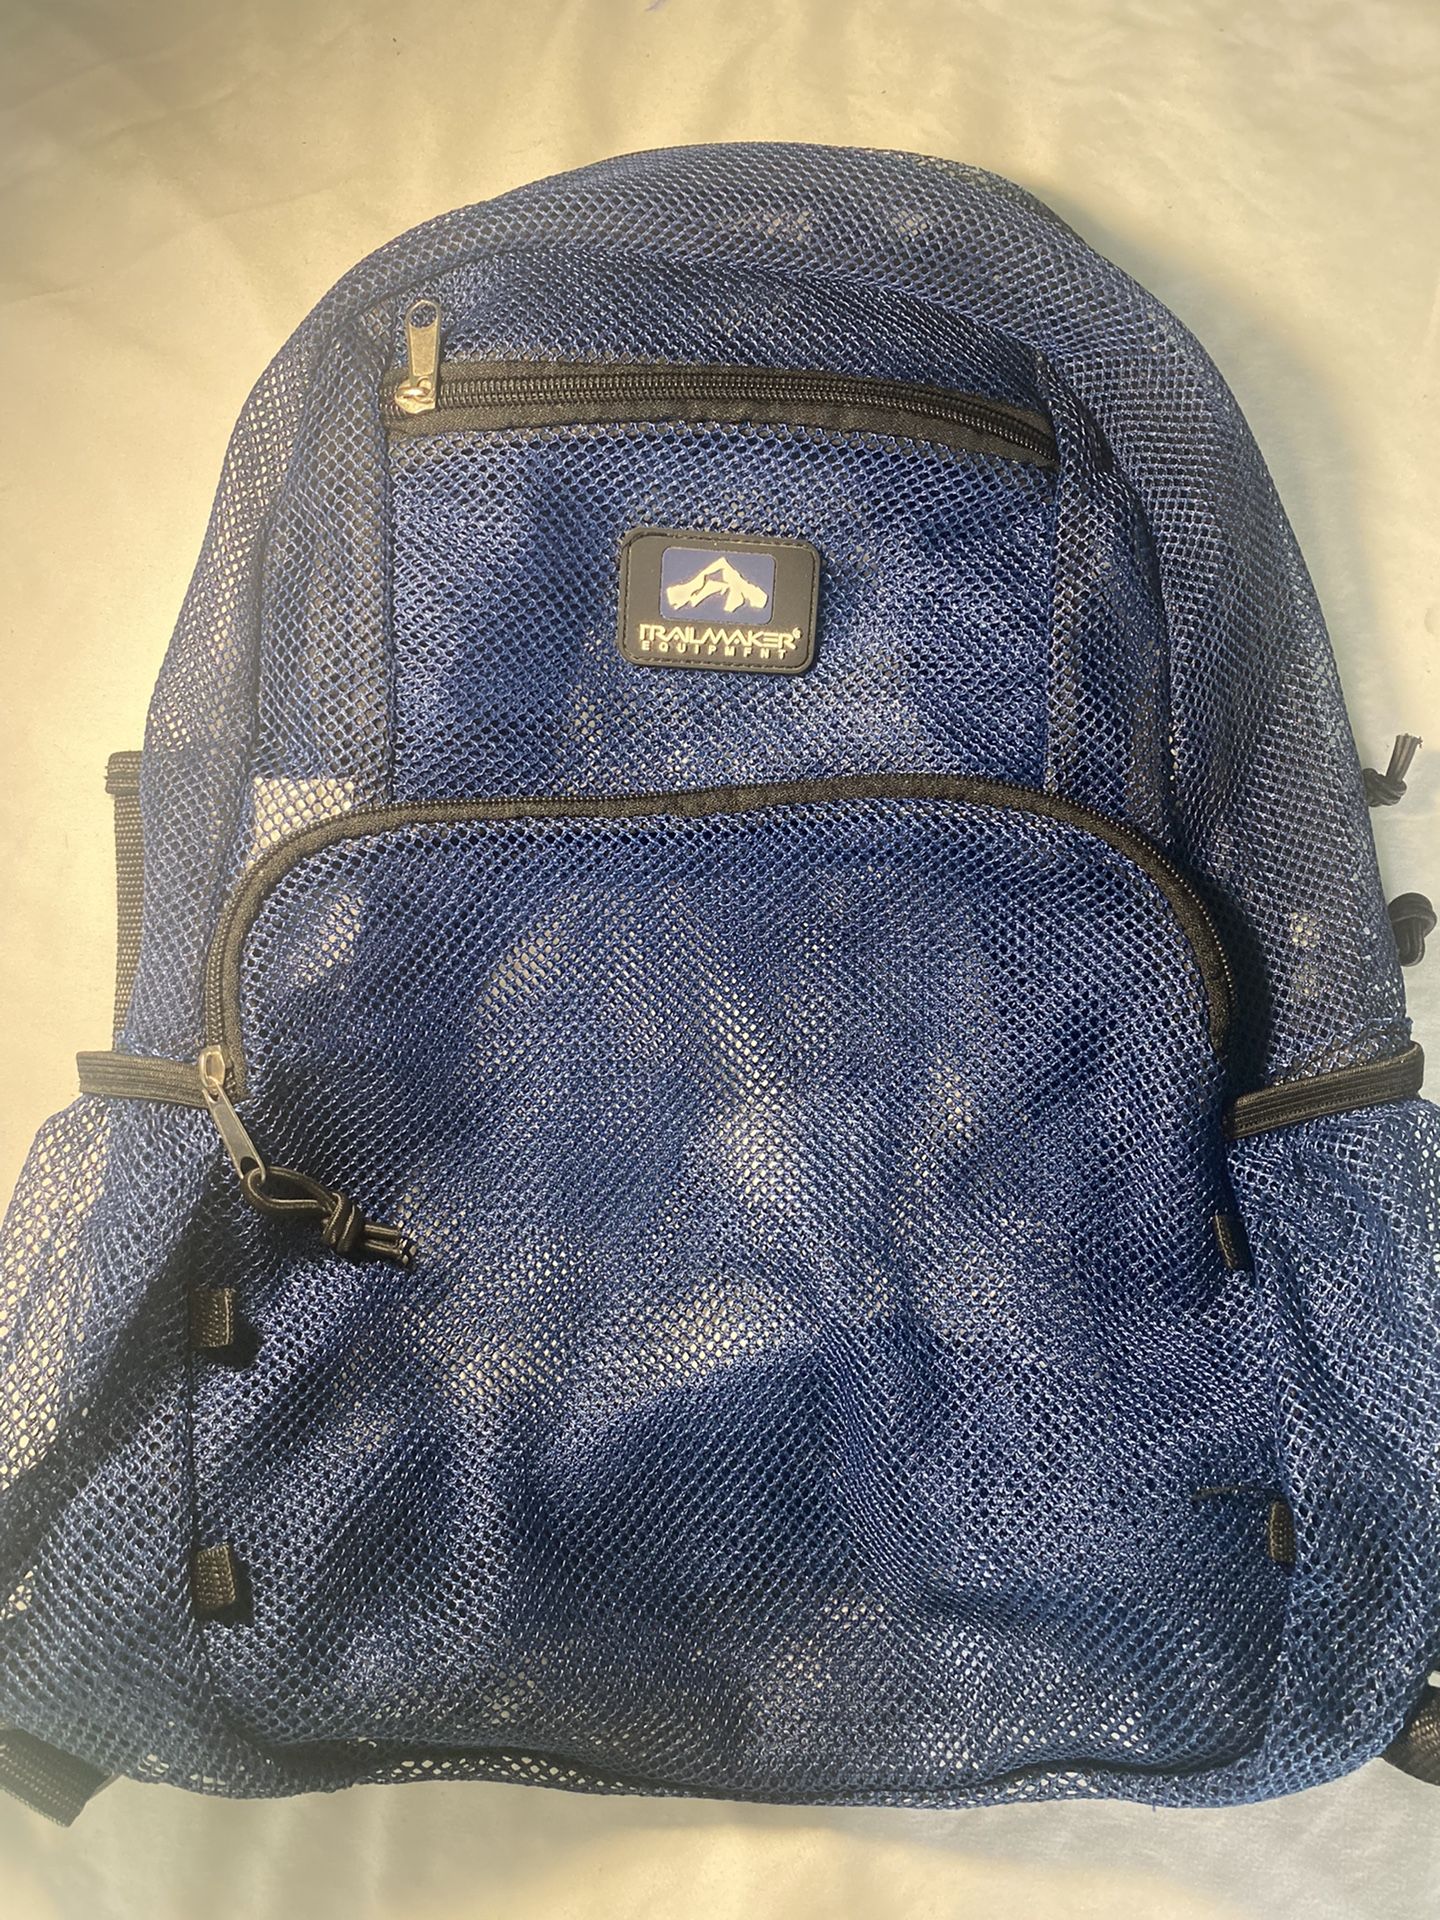 Trailmaker See Through School Backpack ,preown , Like New .